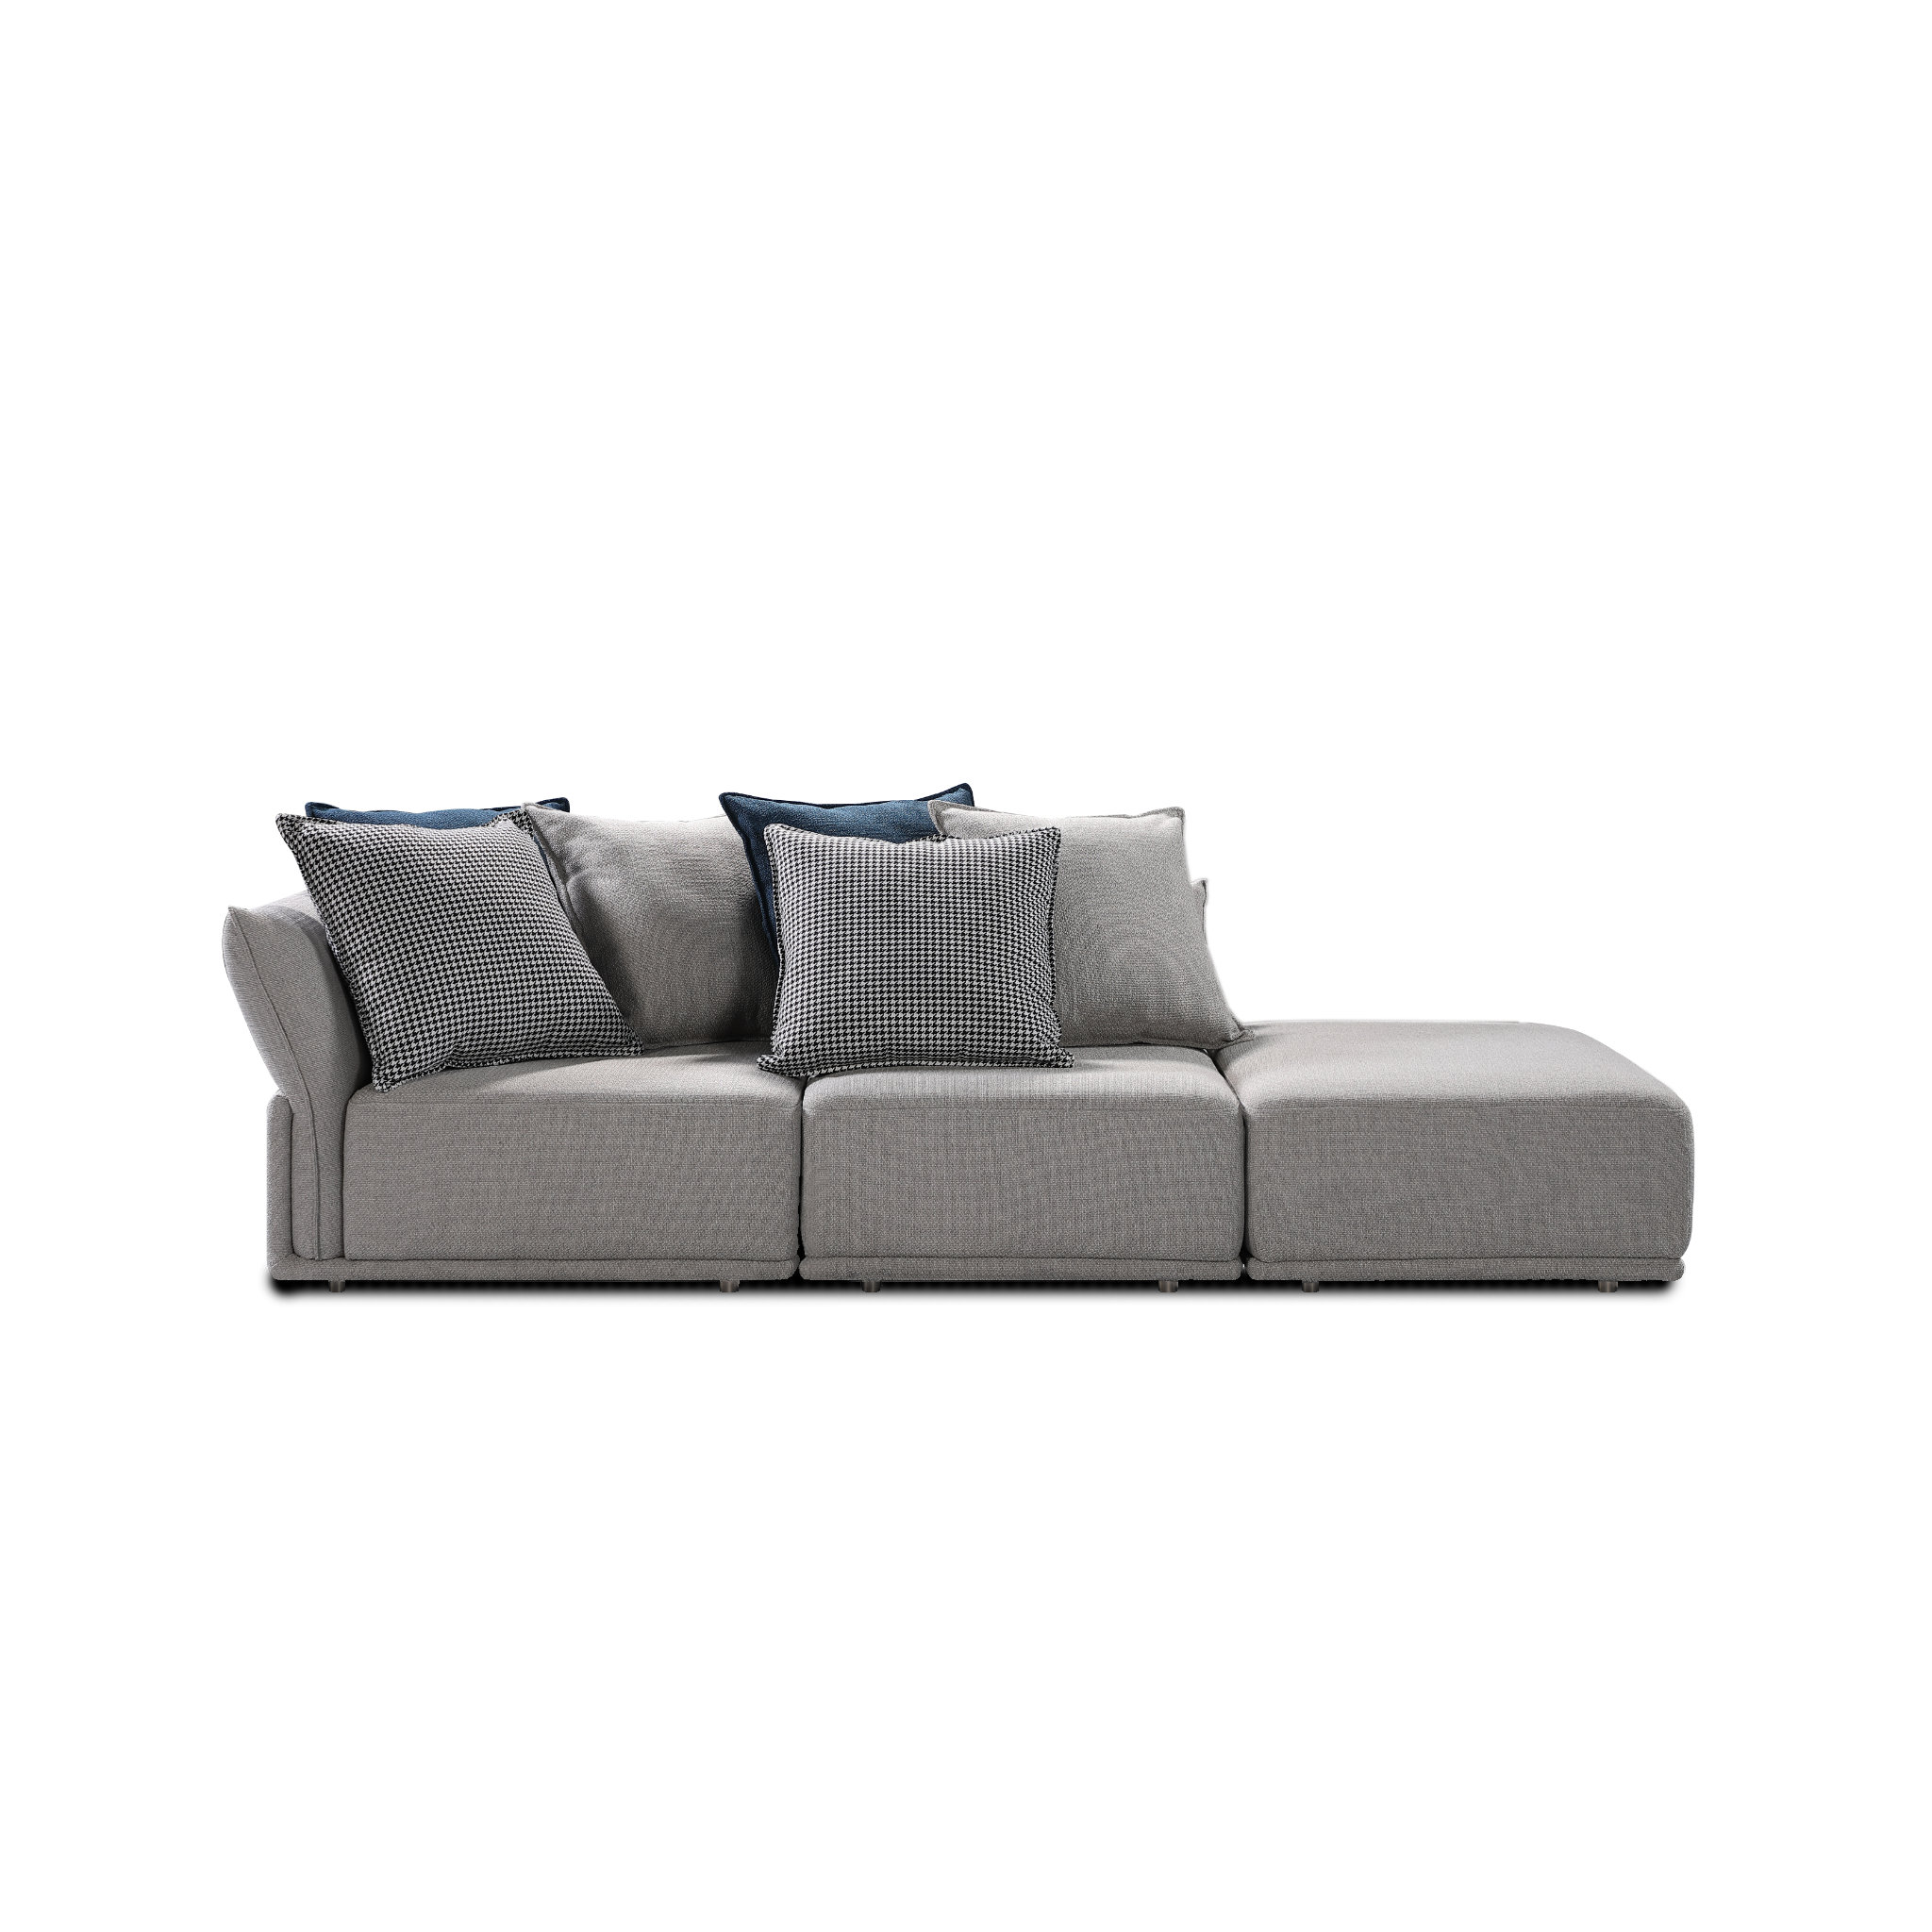 Stratus: Contemporary Sofa 3 seat - Expand Furniture - Folding Tables,  Smarter Wall Beds, Space Savers